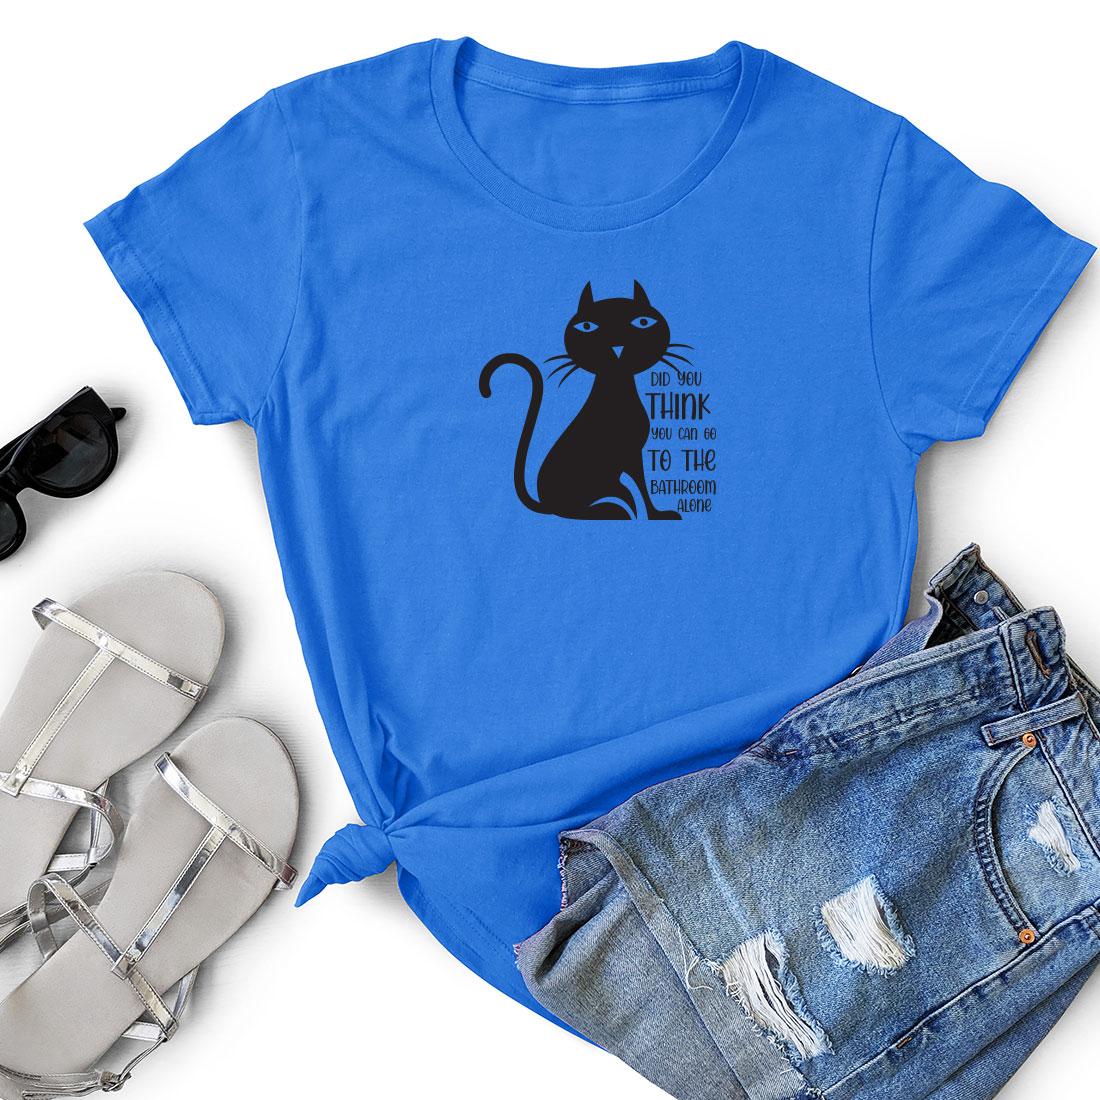 Blue shirt with a black cat on it.